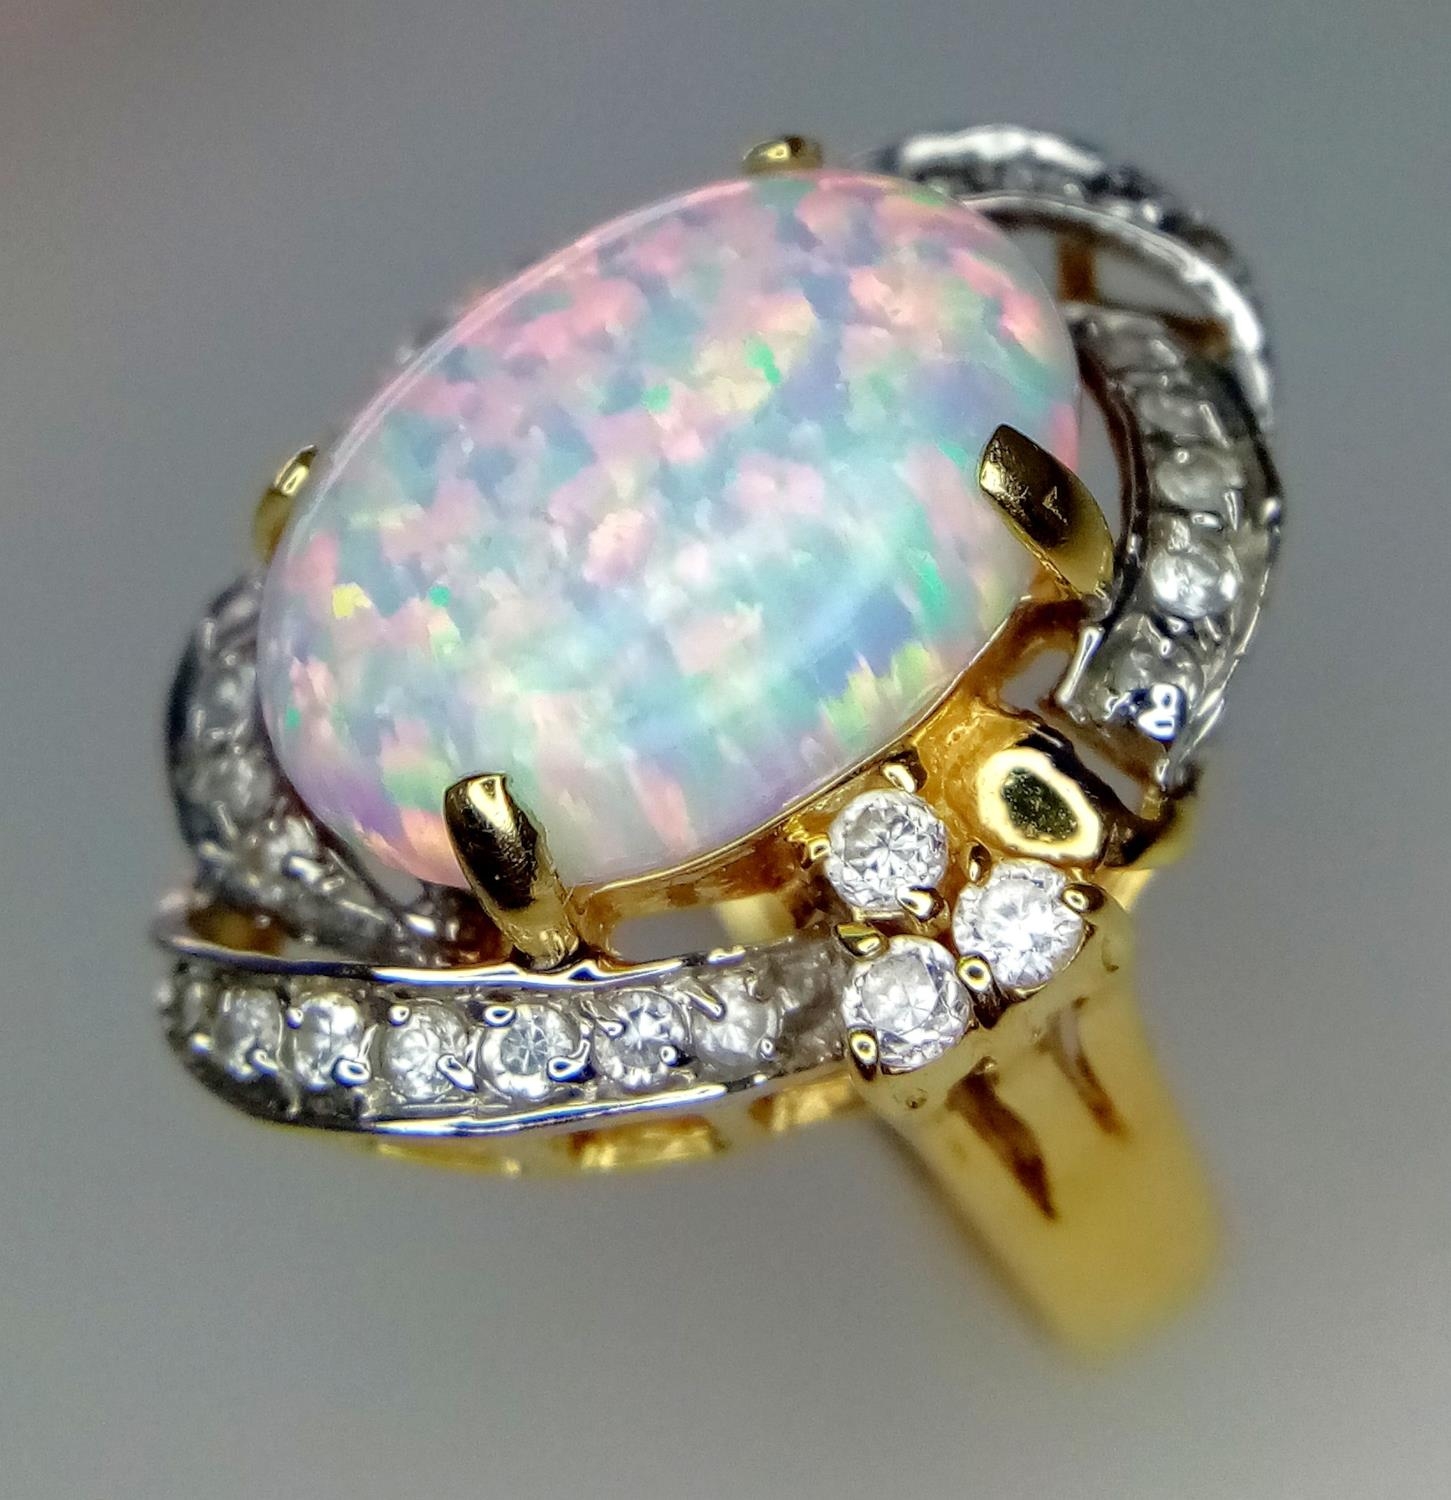 A 14K Yellow Gold and Opal Ring. White stone decoration. Size O. 6g total weight. - Image 3 of 7